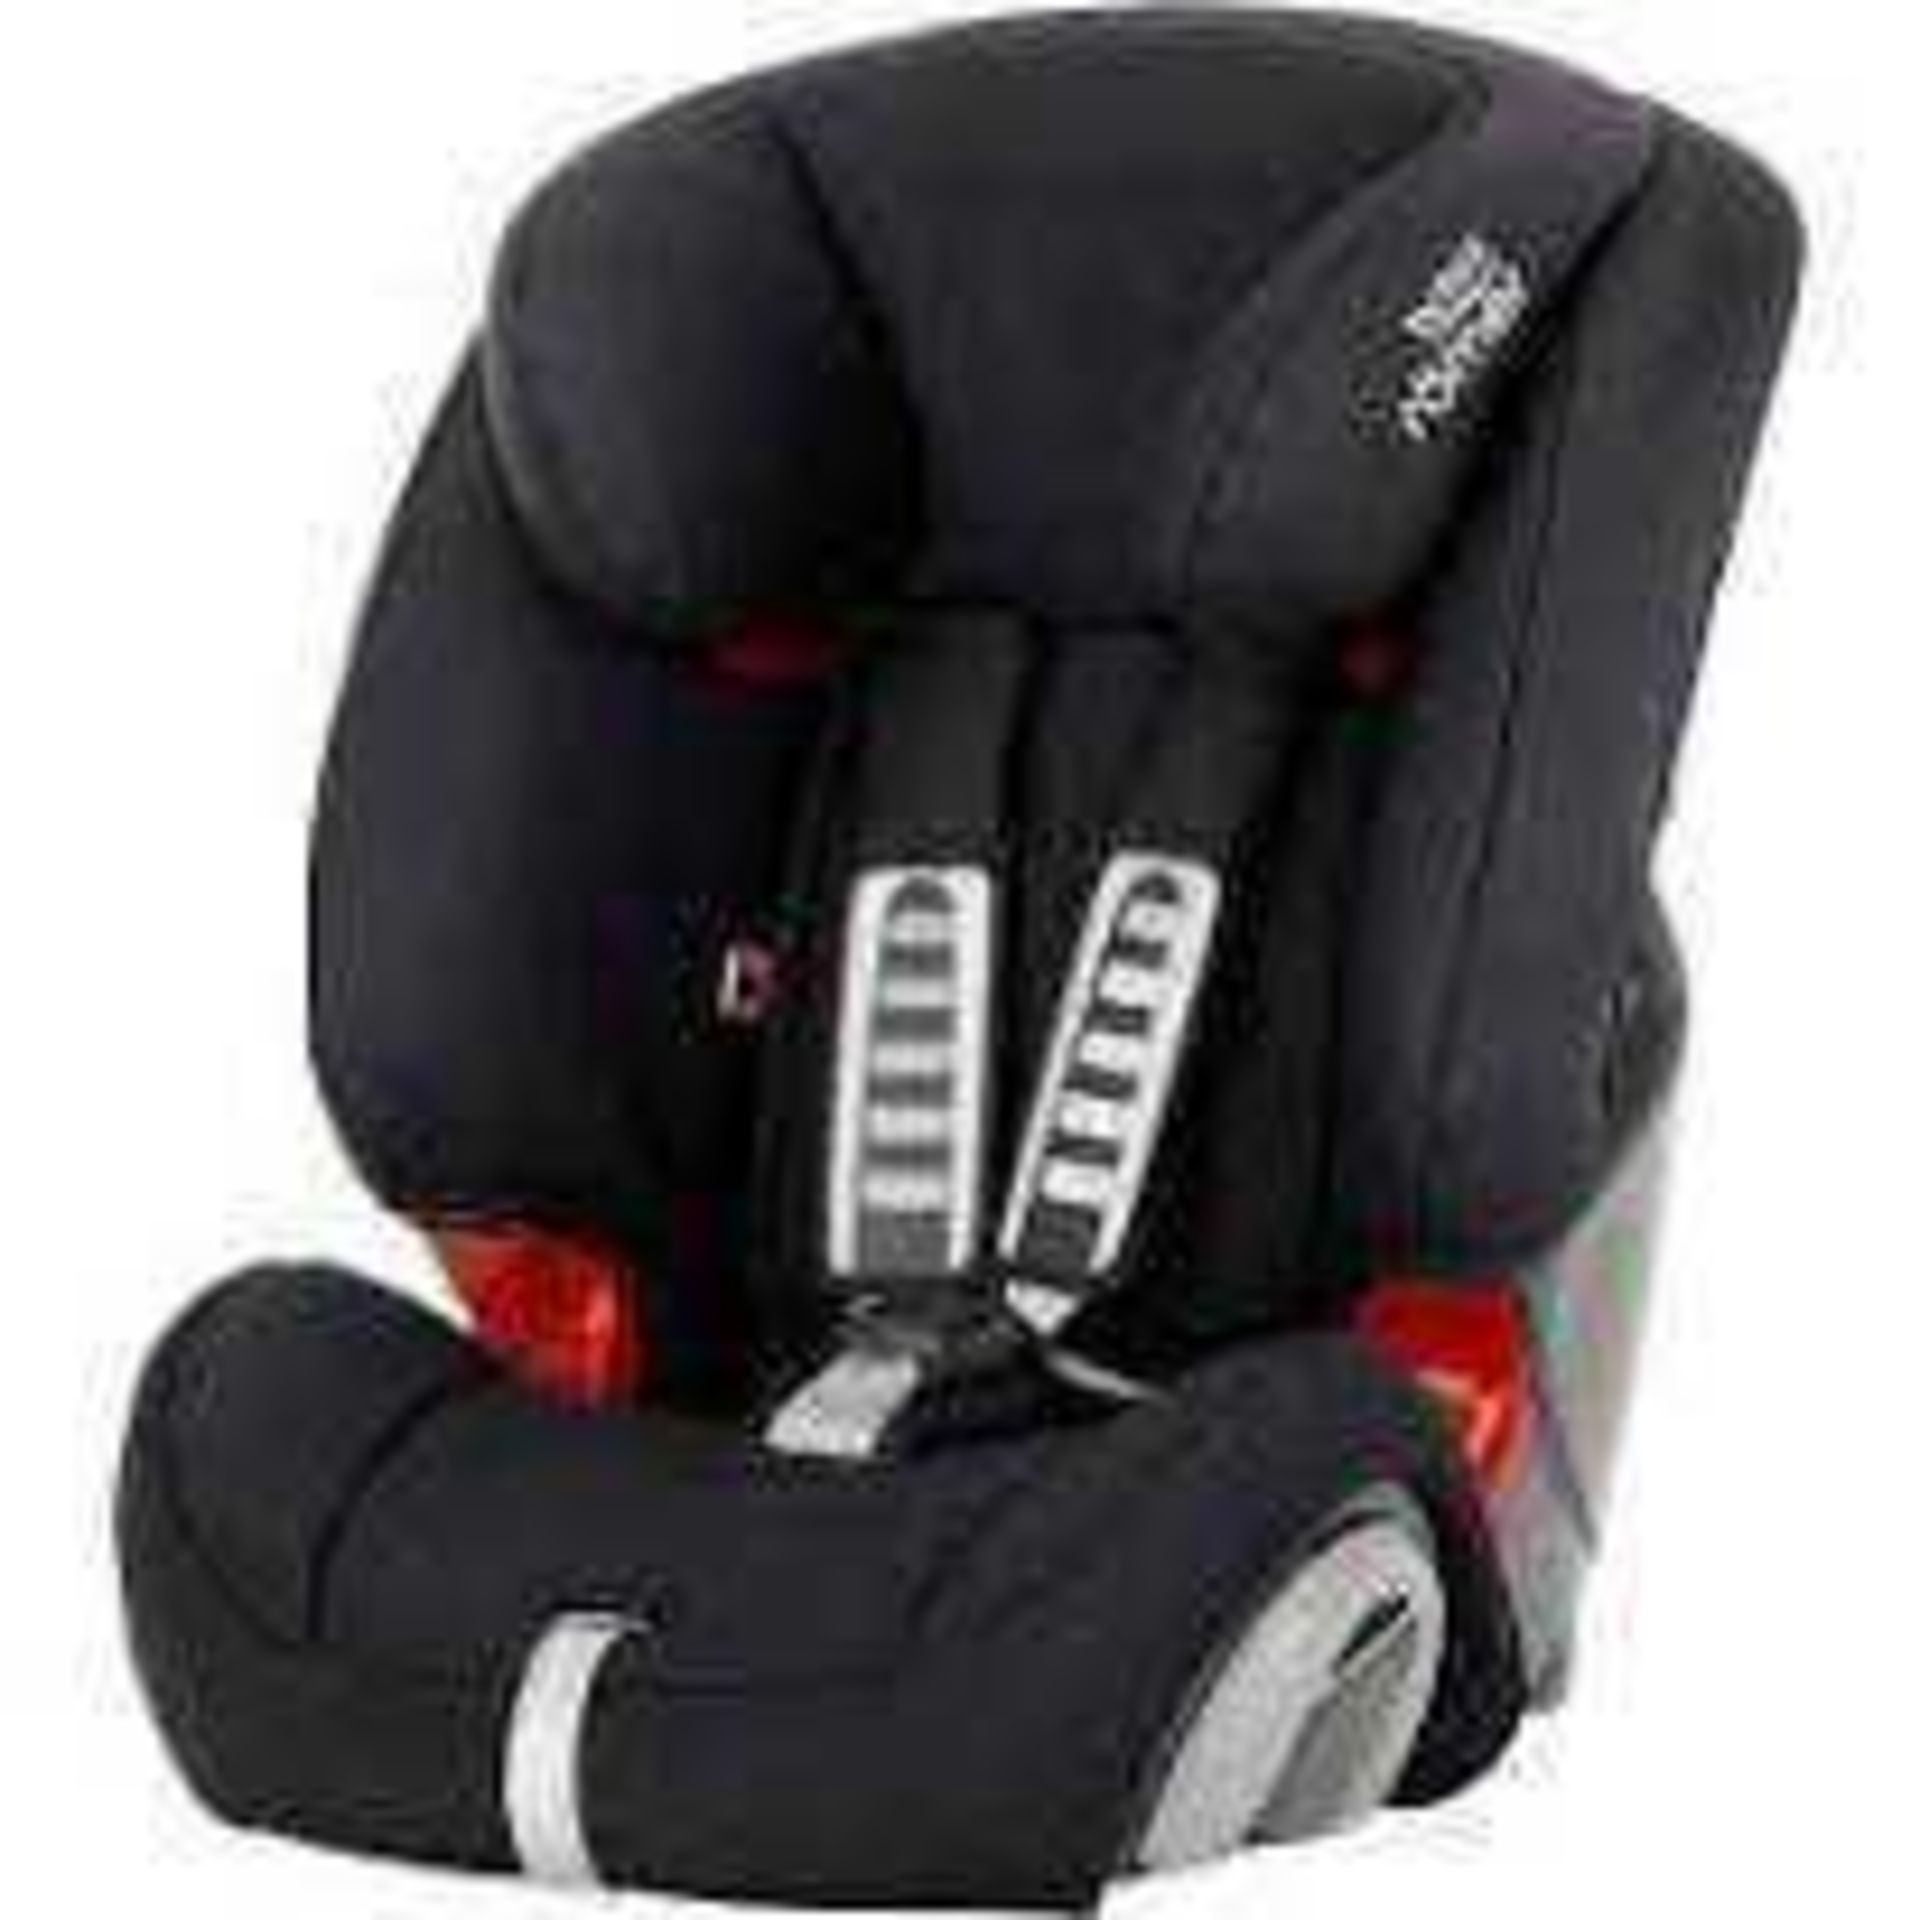 RRP £200 Unboxed Britax Romer Advansafix Iv R Baby Car Seat In Red And Black